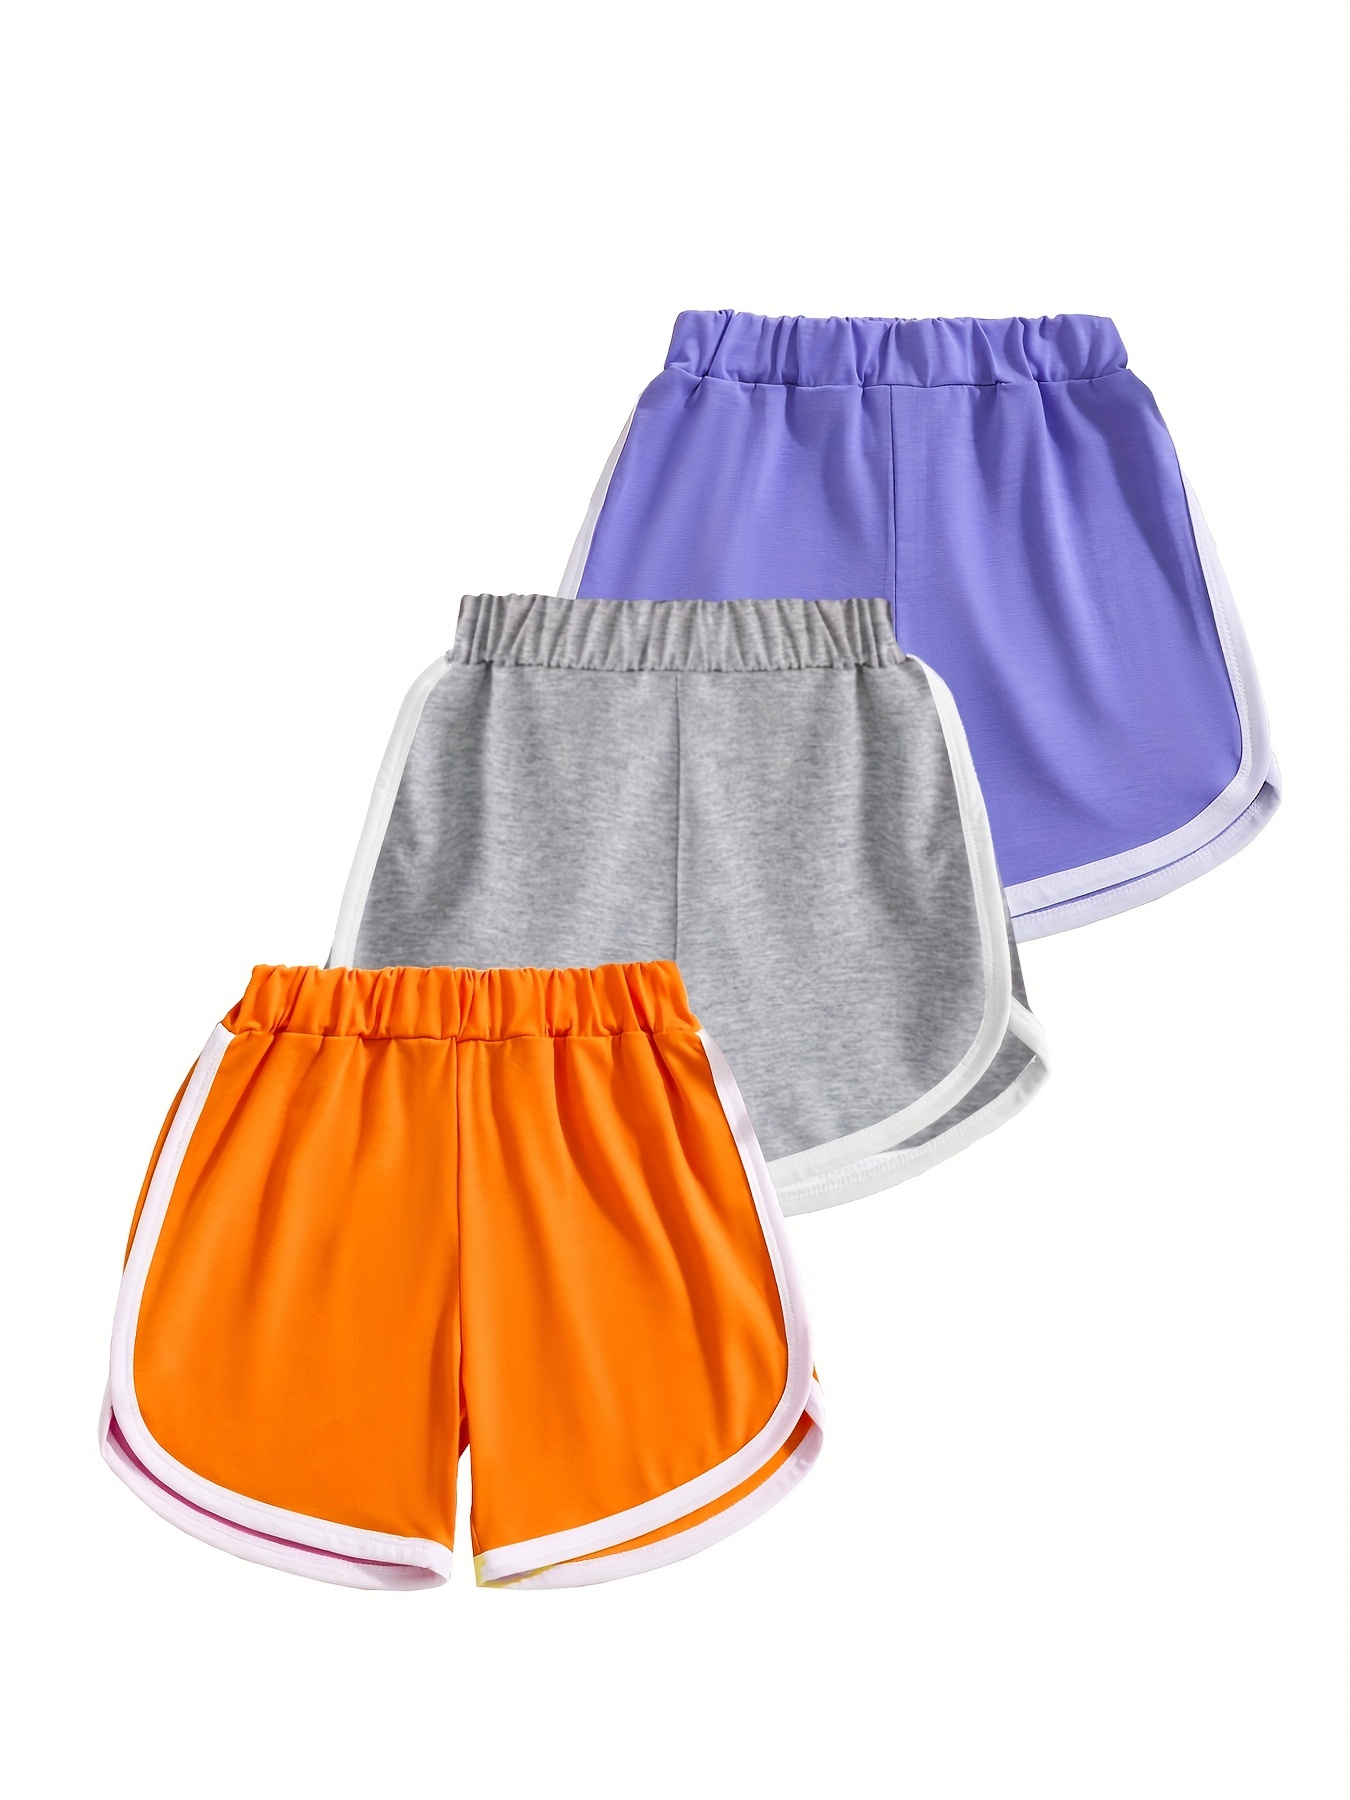 Girls Casual Athletic Elastic Waist Contrast Binding Track Shorts Kids  Summer Clothes